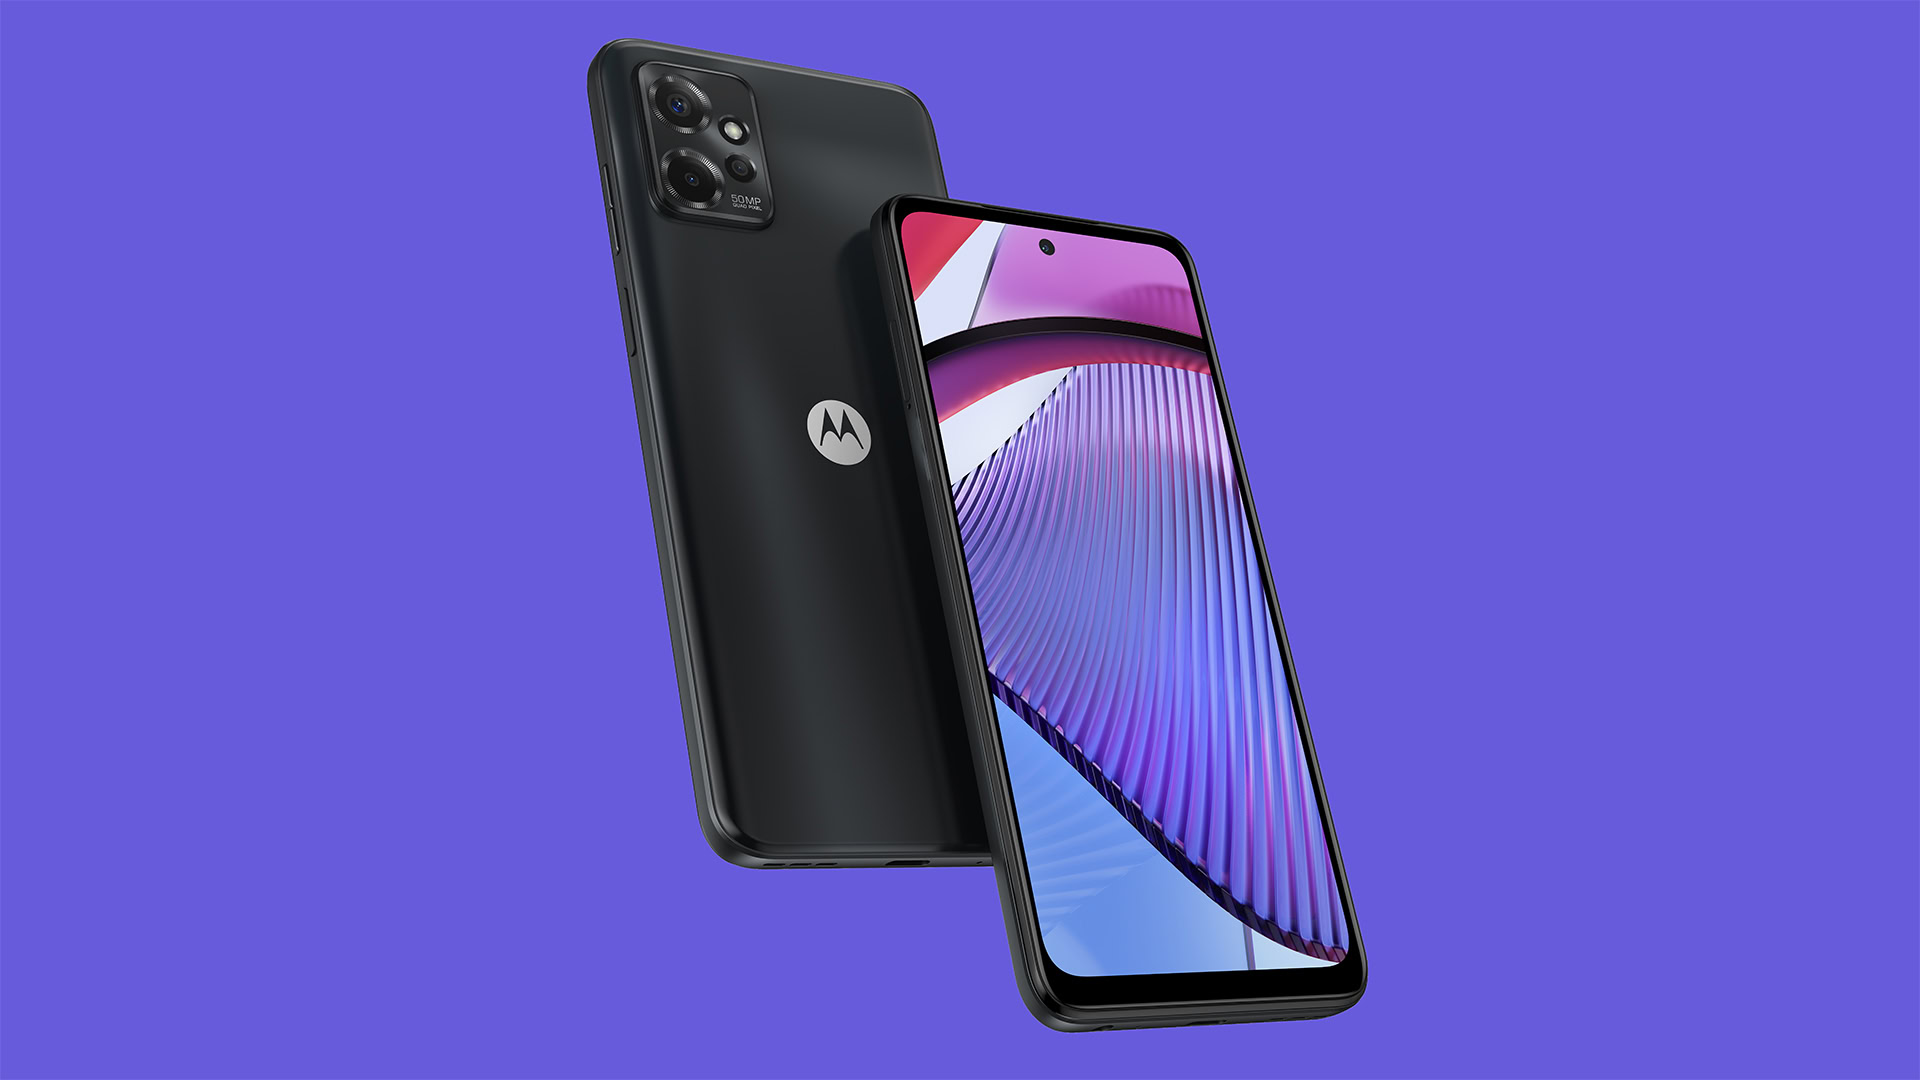 Motorola Moto G Power 5G (2023) has 5G support for the first time